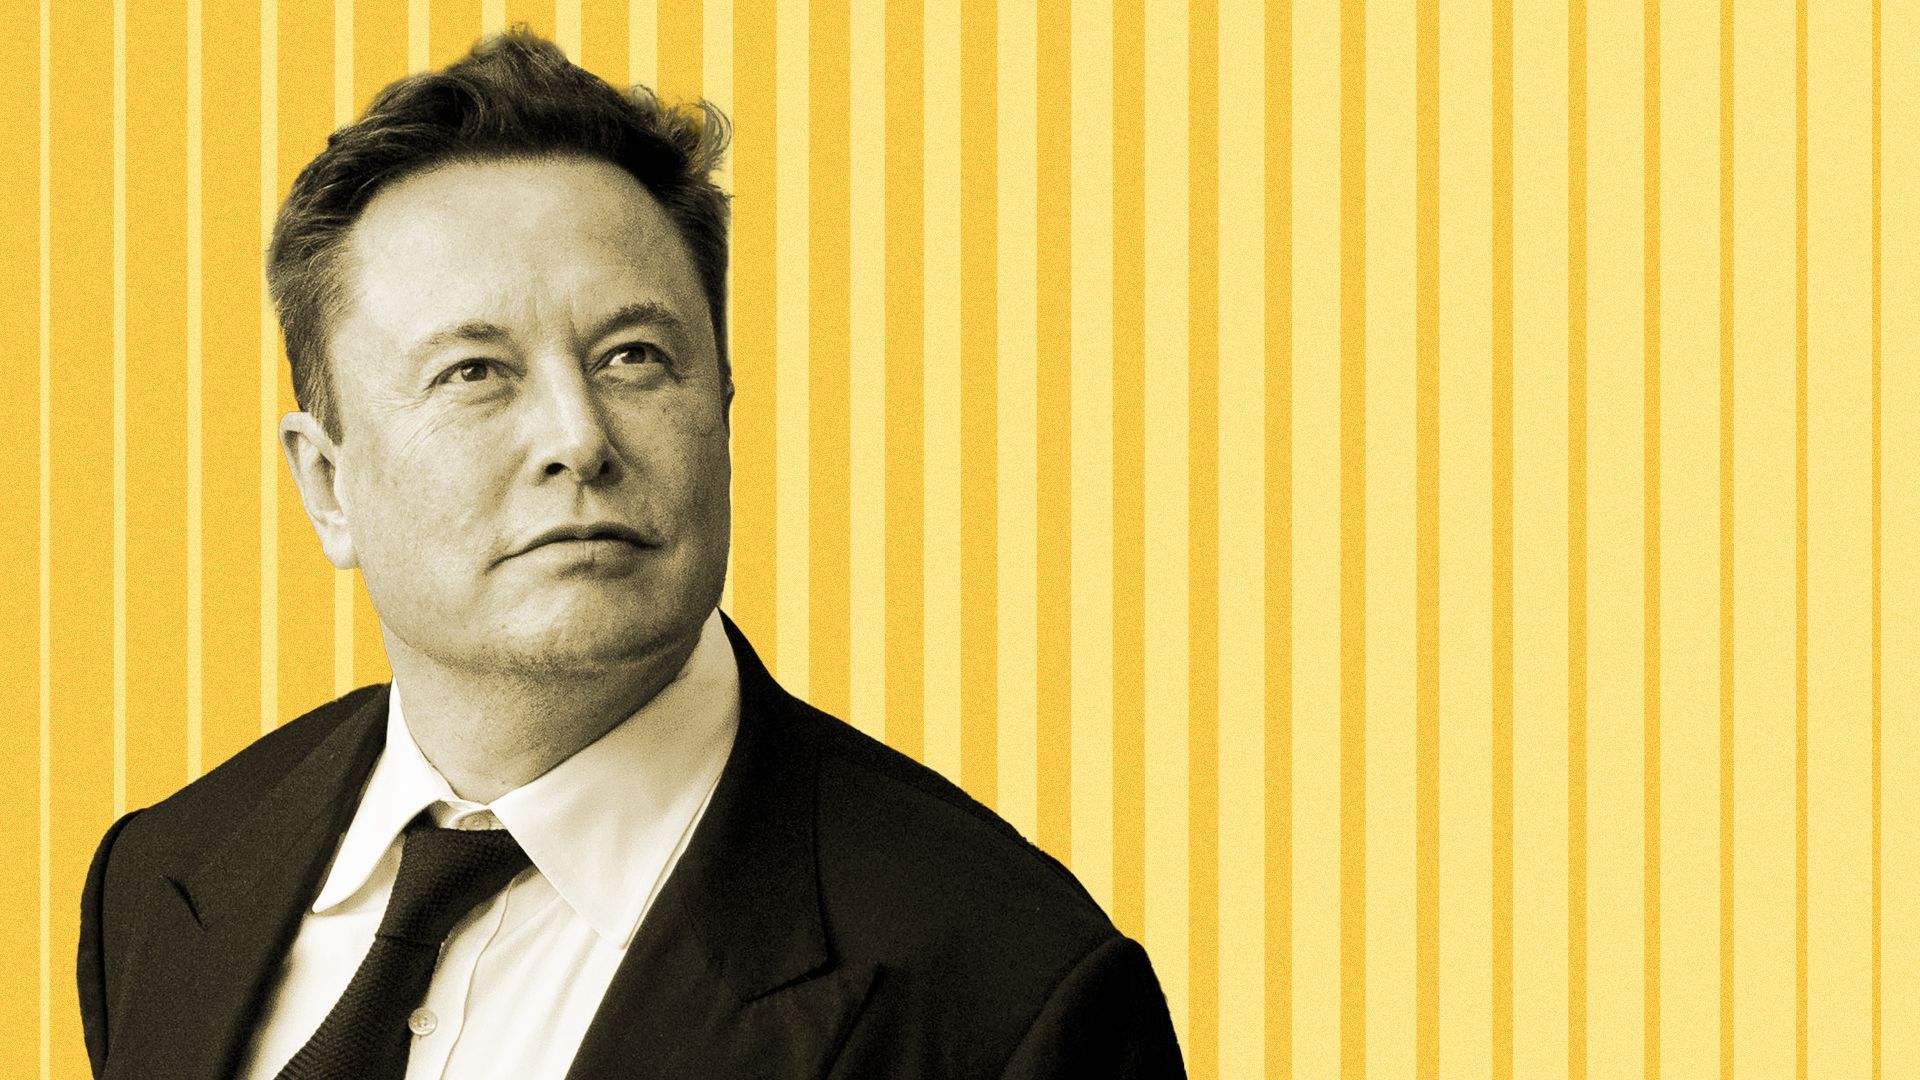 Photo illustration of Elon Musk against an abstract background.